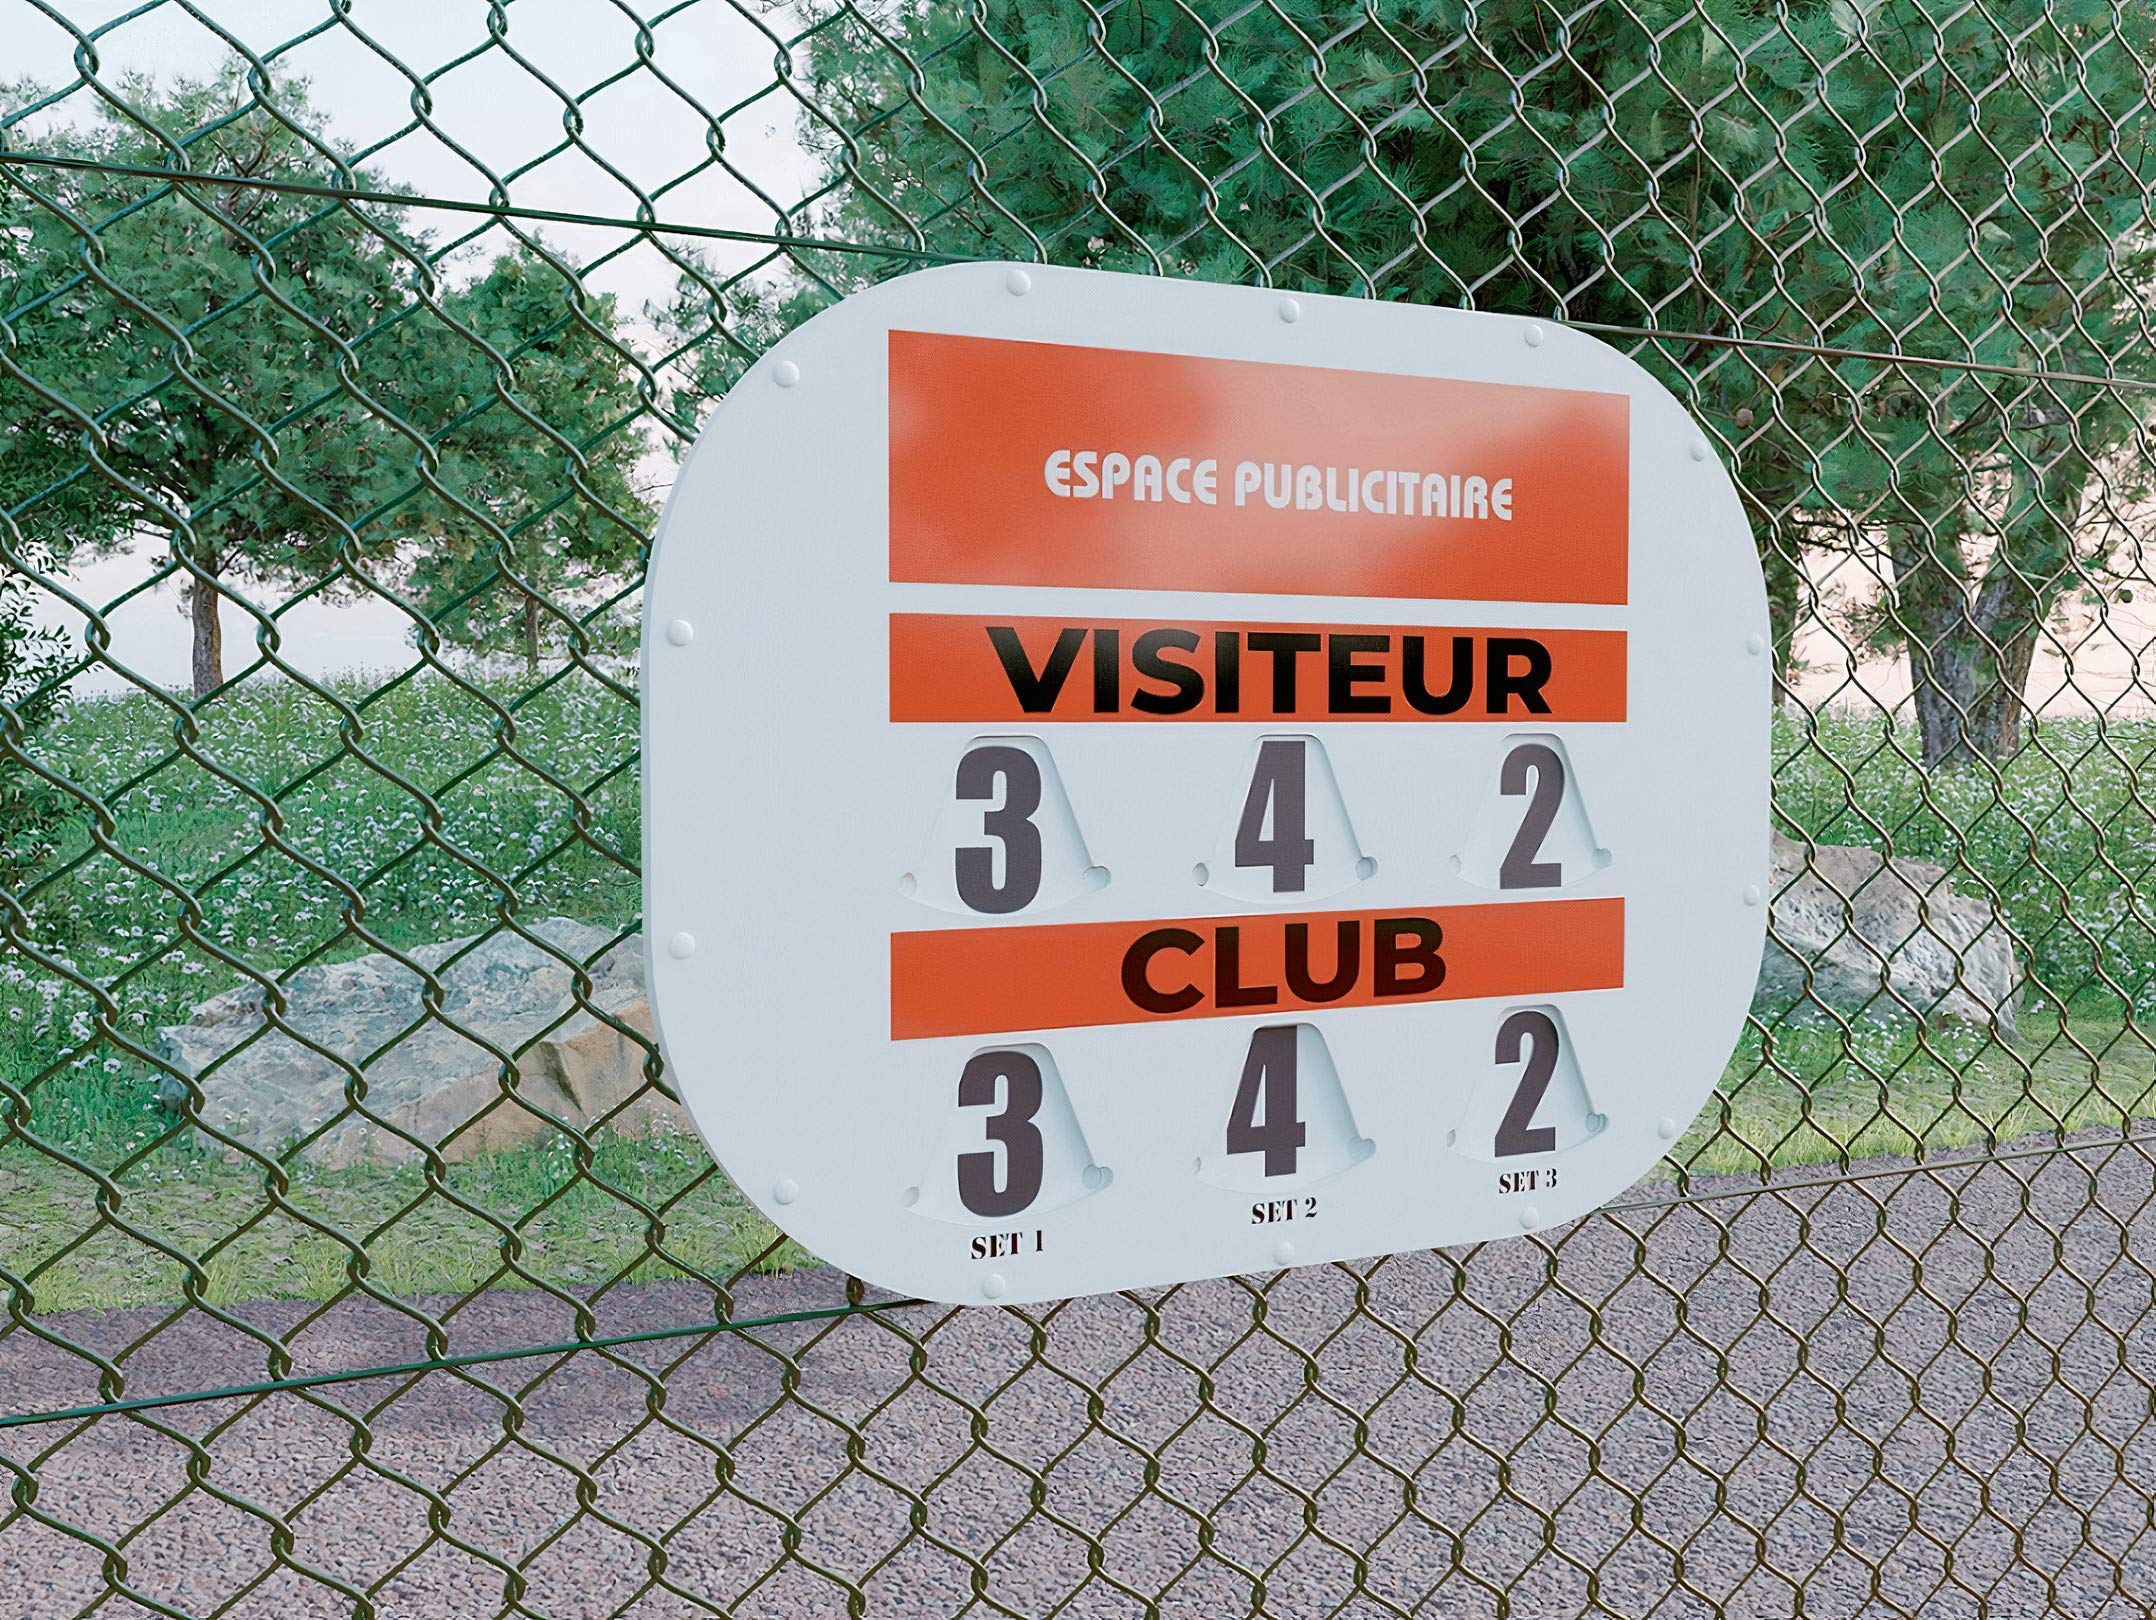 Tennis Scorer, Manual display with rotating discs (80x60 Cliptec) made in France in PVC and guaranteed for 2 years, designed with an advertising space to make your club profitable